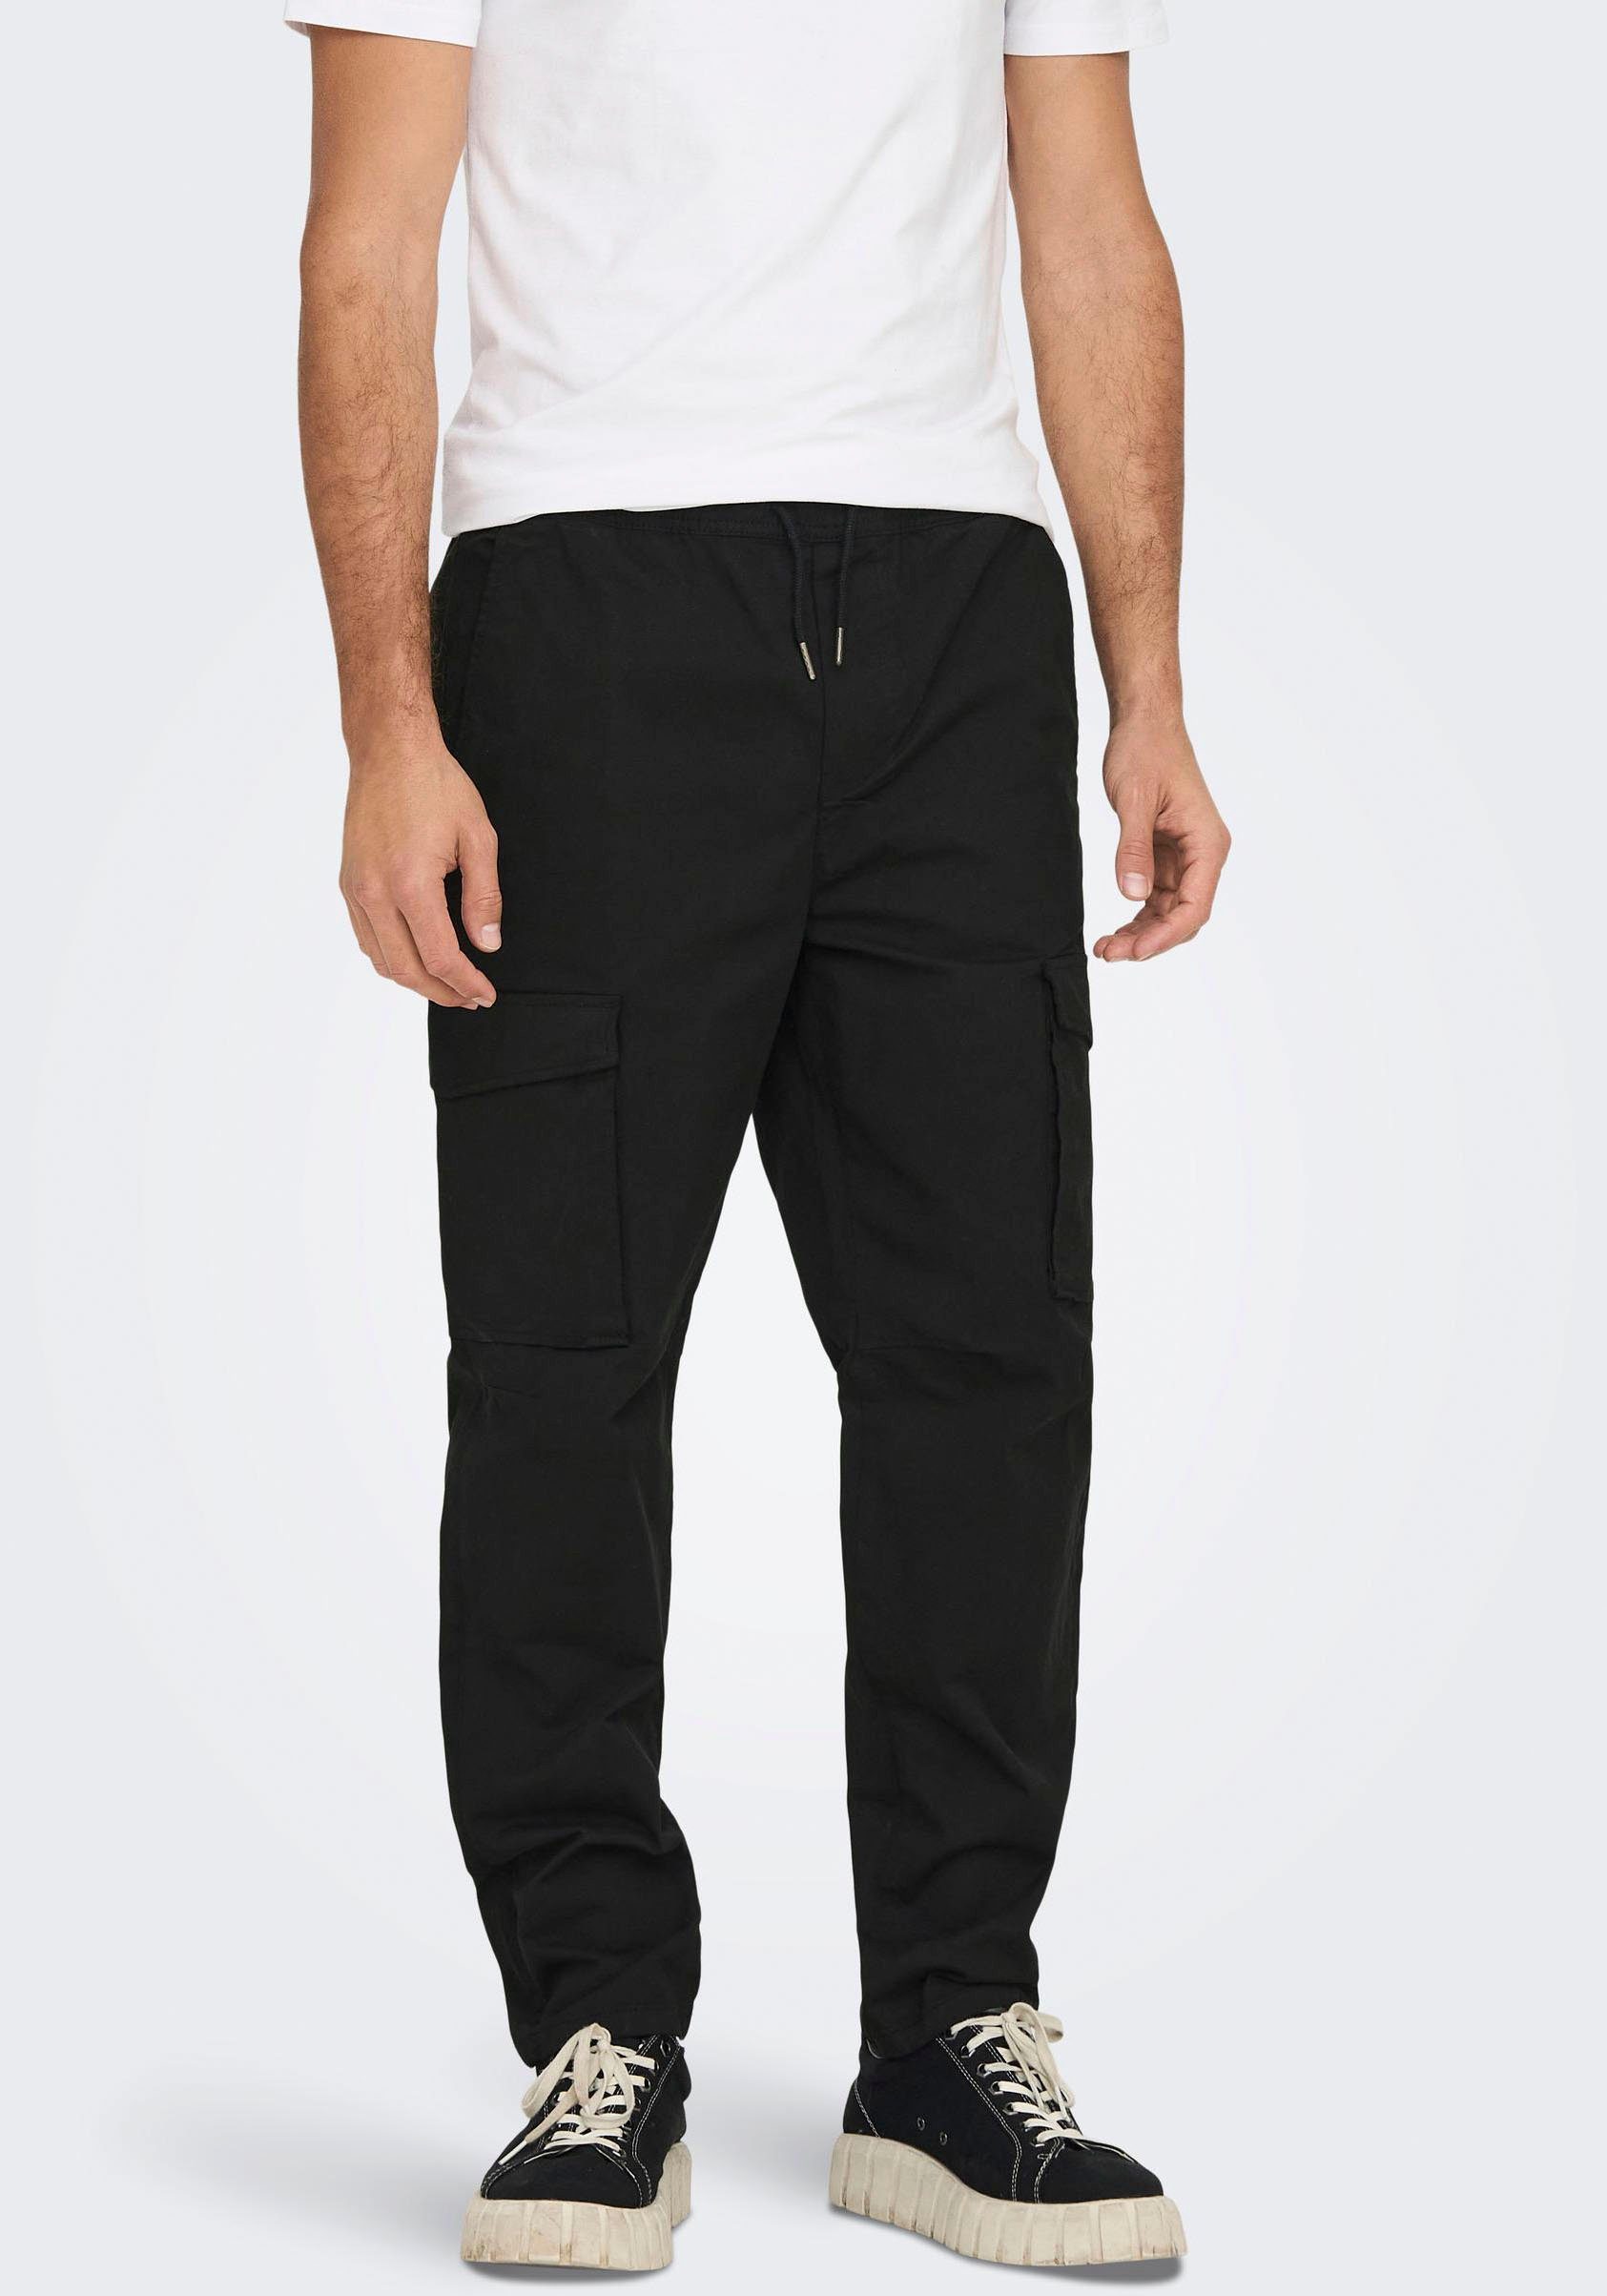 TAPERED Cargohose Baumwollmix durch ONSELL 4485, Angenehmer ONLY CARGO SONS & Tragekomfort